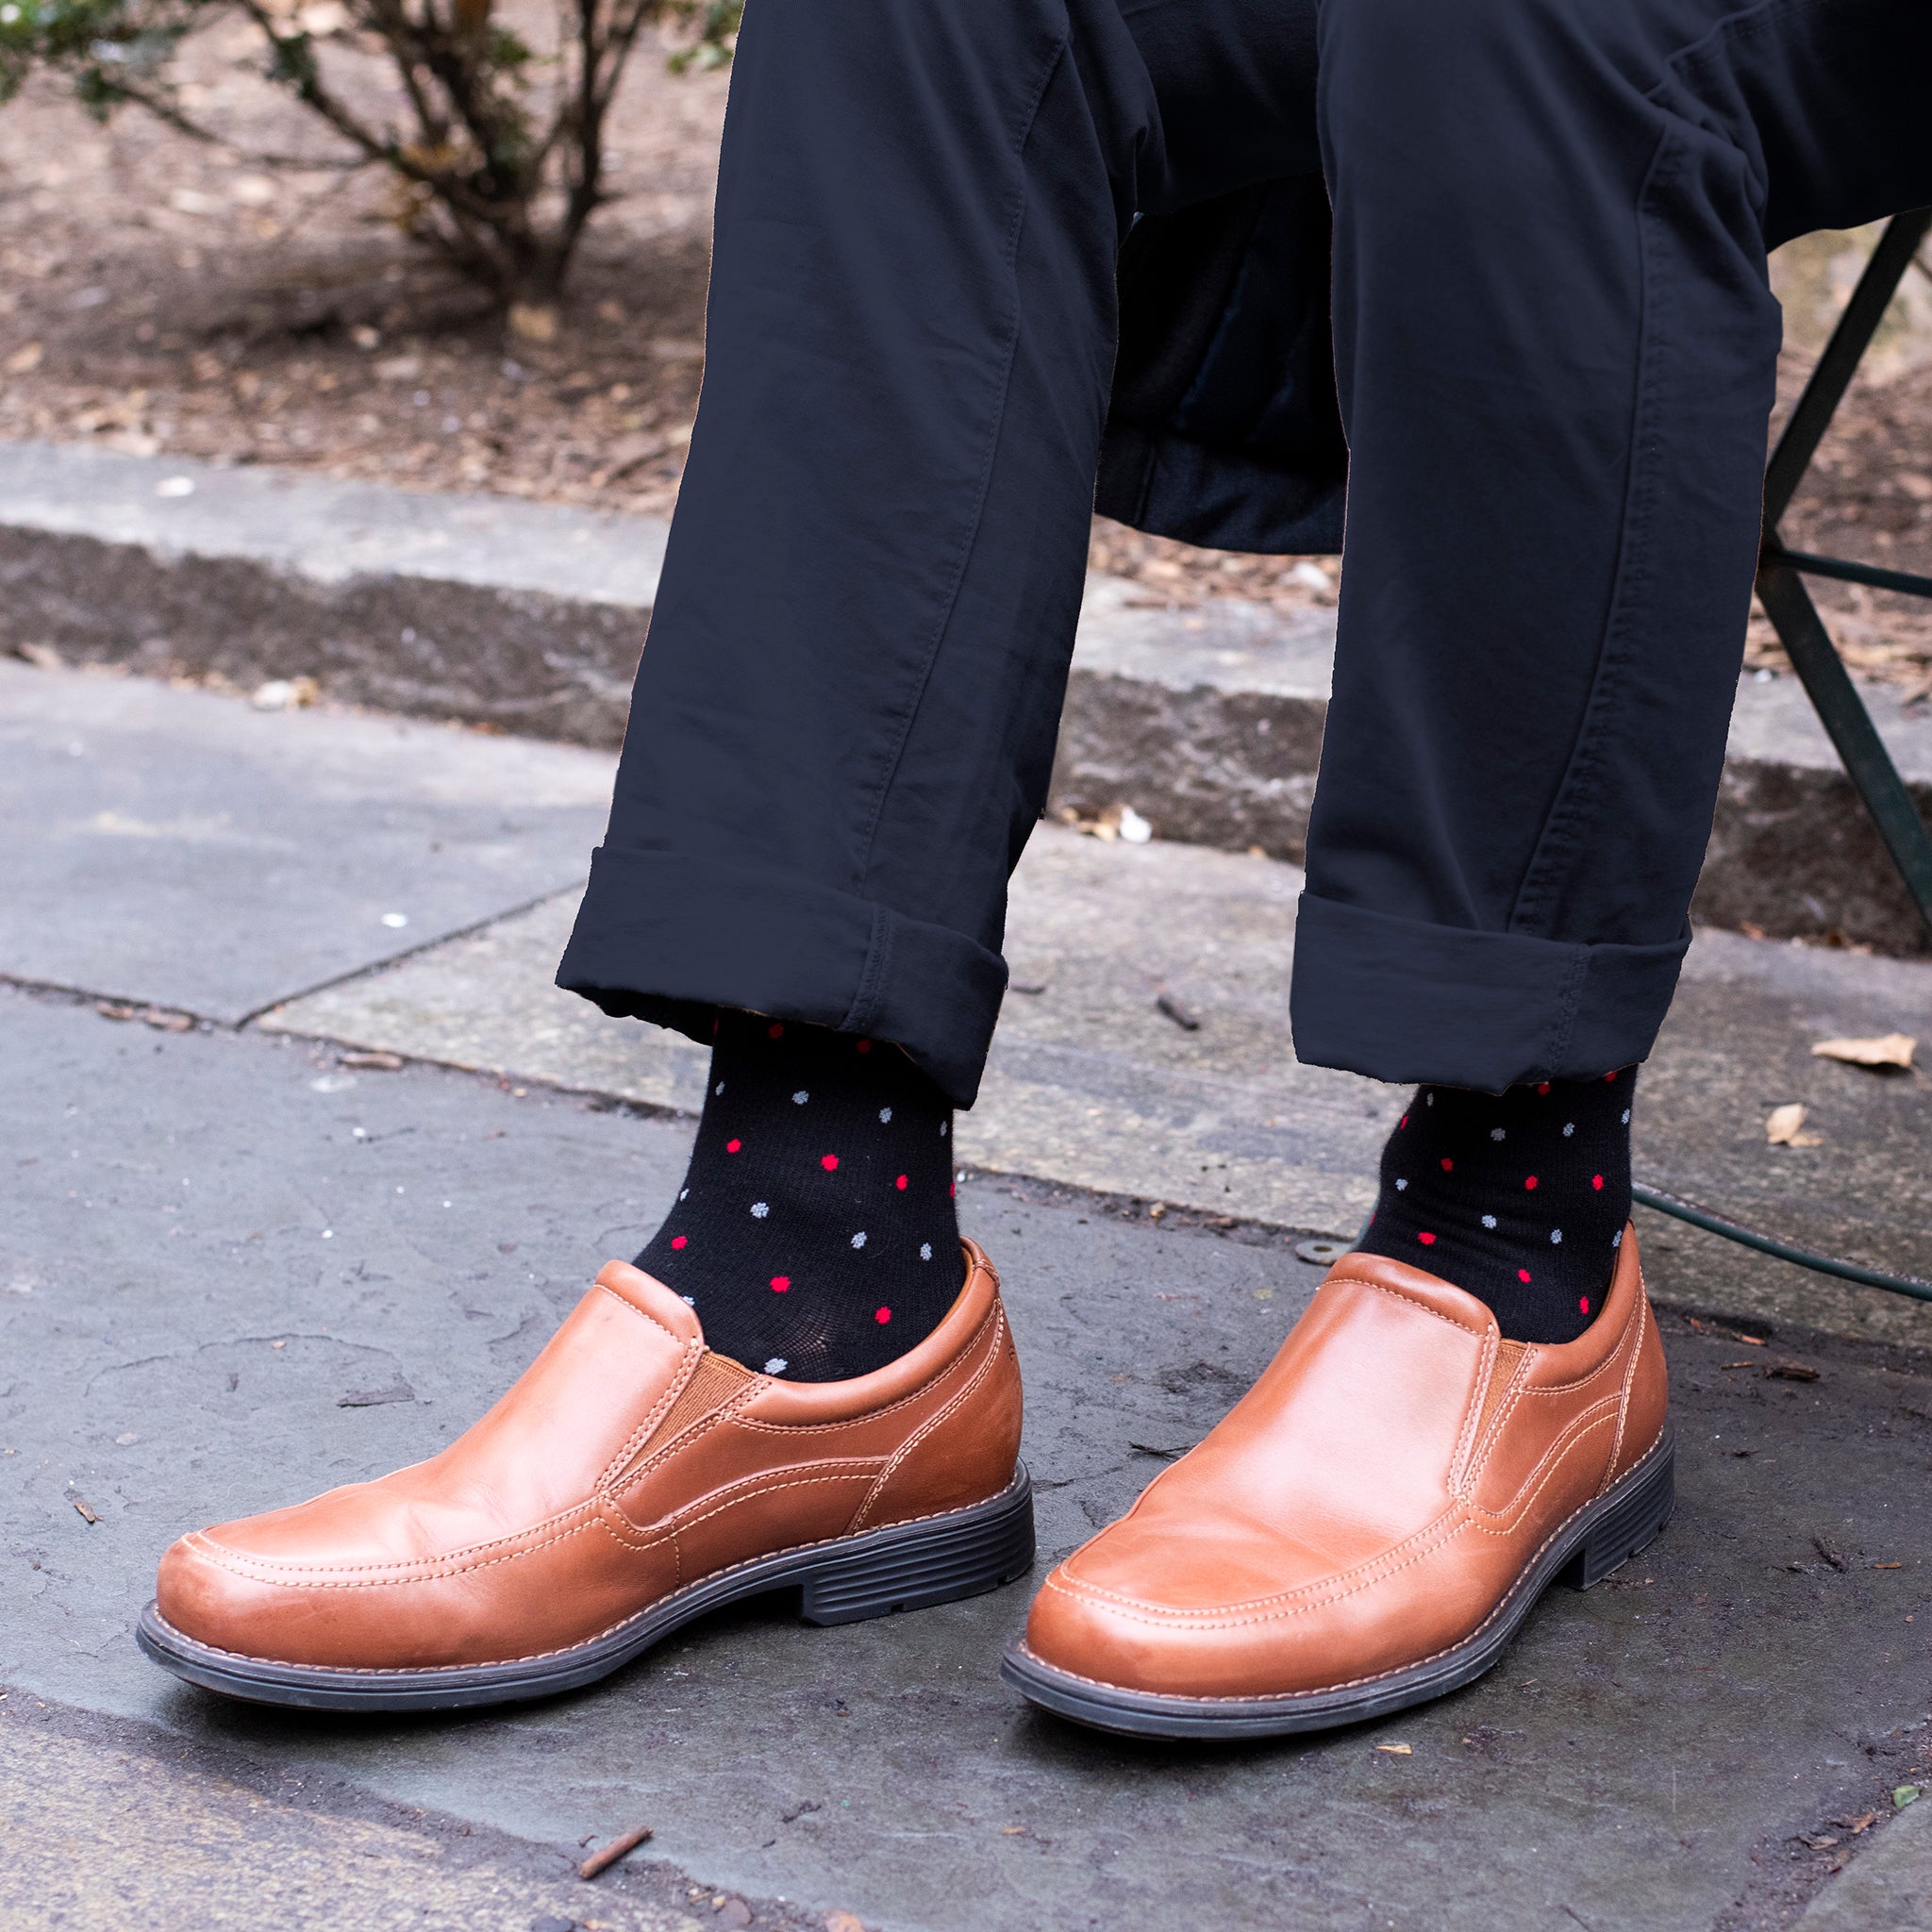 5 Careers That Need Compression Socks For Standing All Day